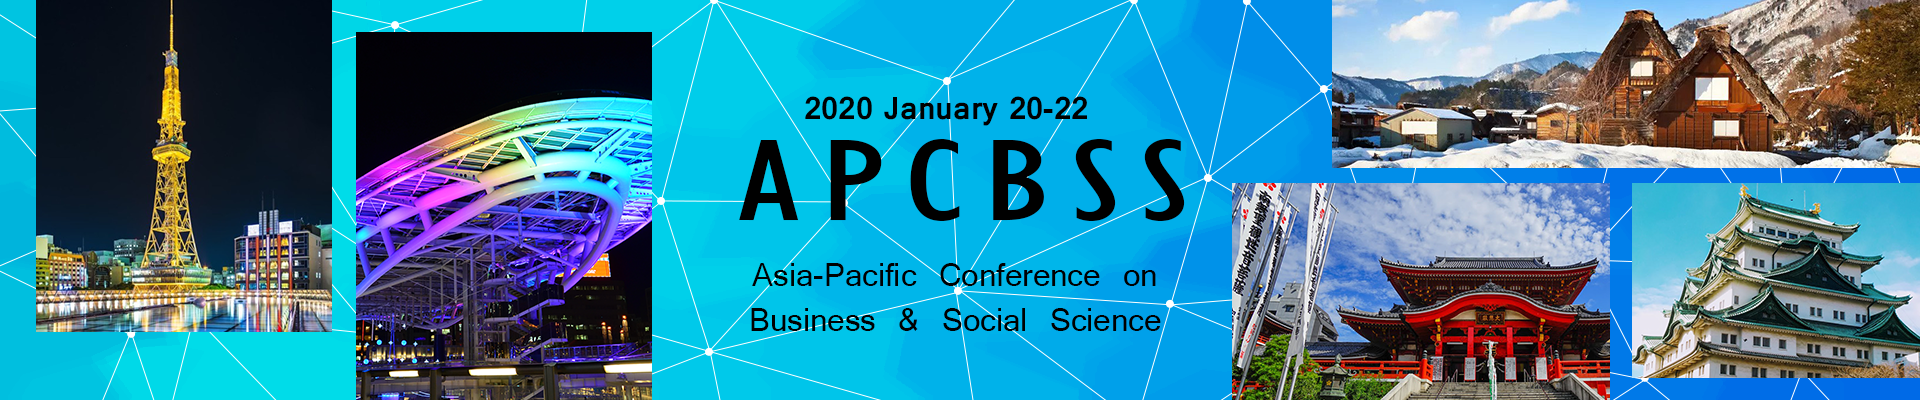 Asia-Pacific Conference on Business & Social Science